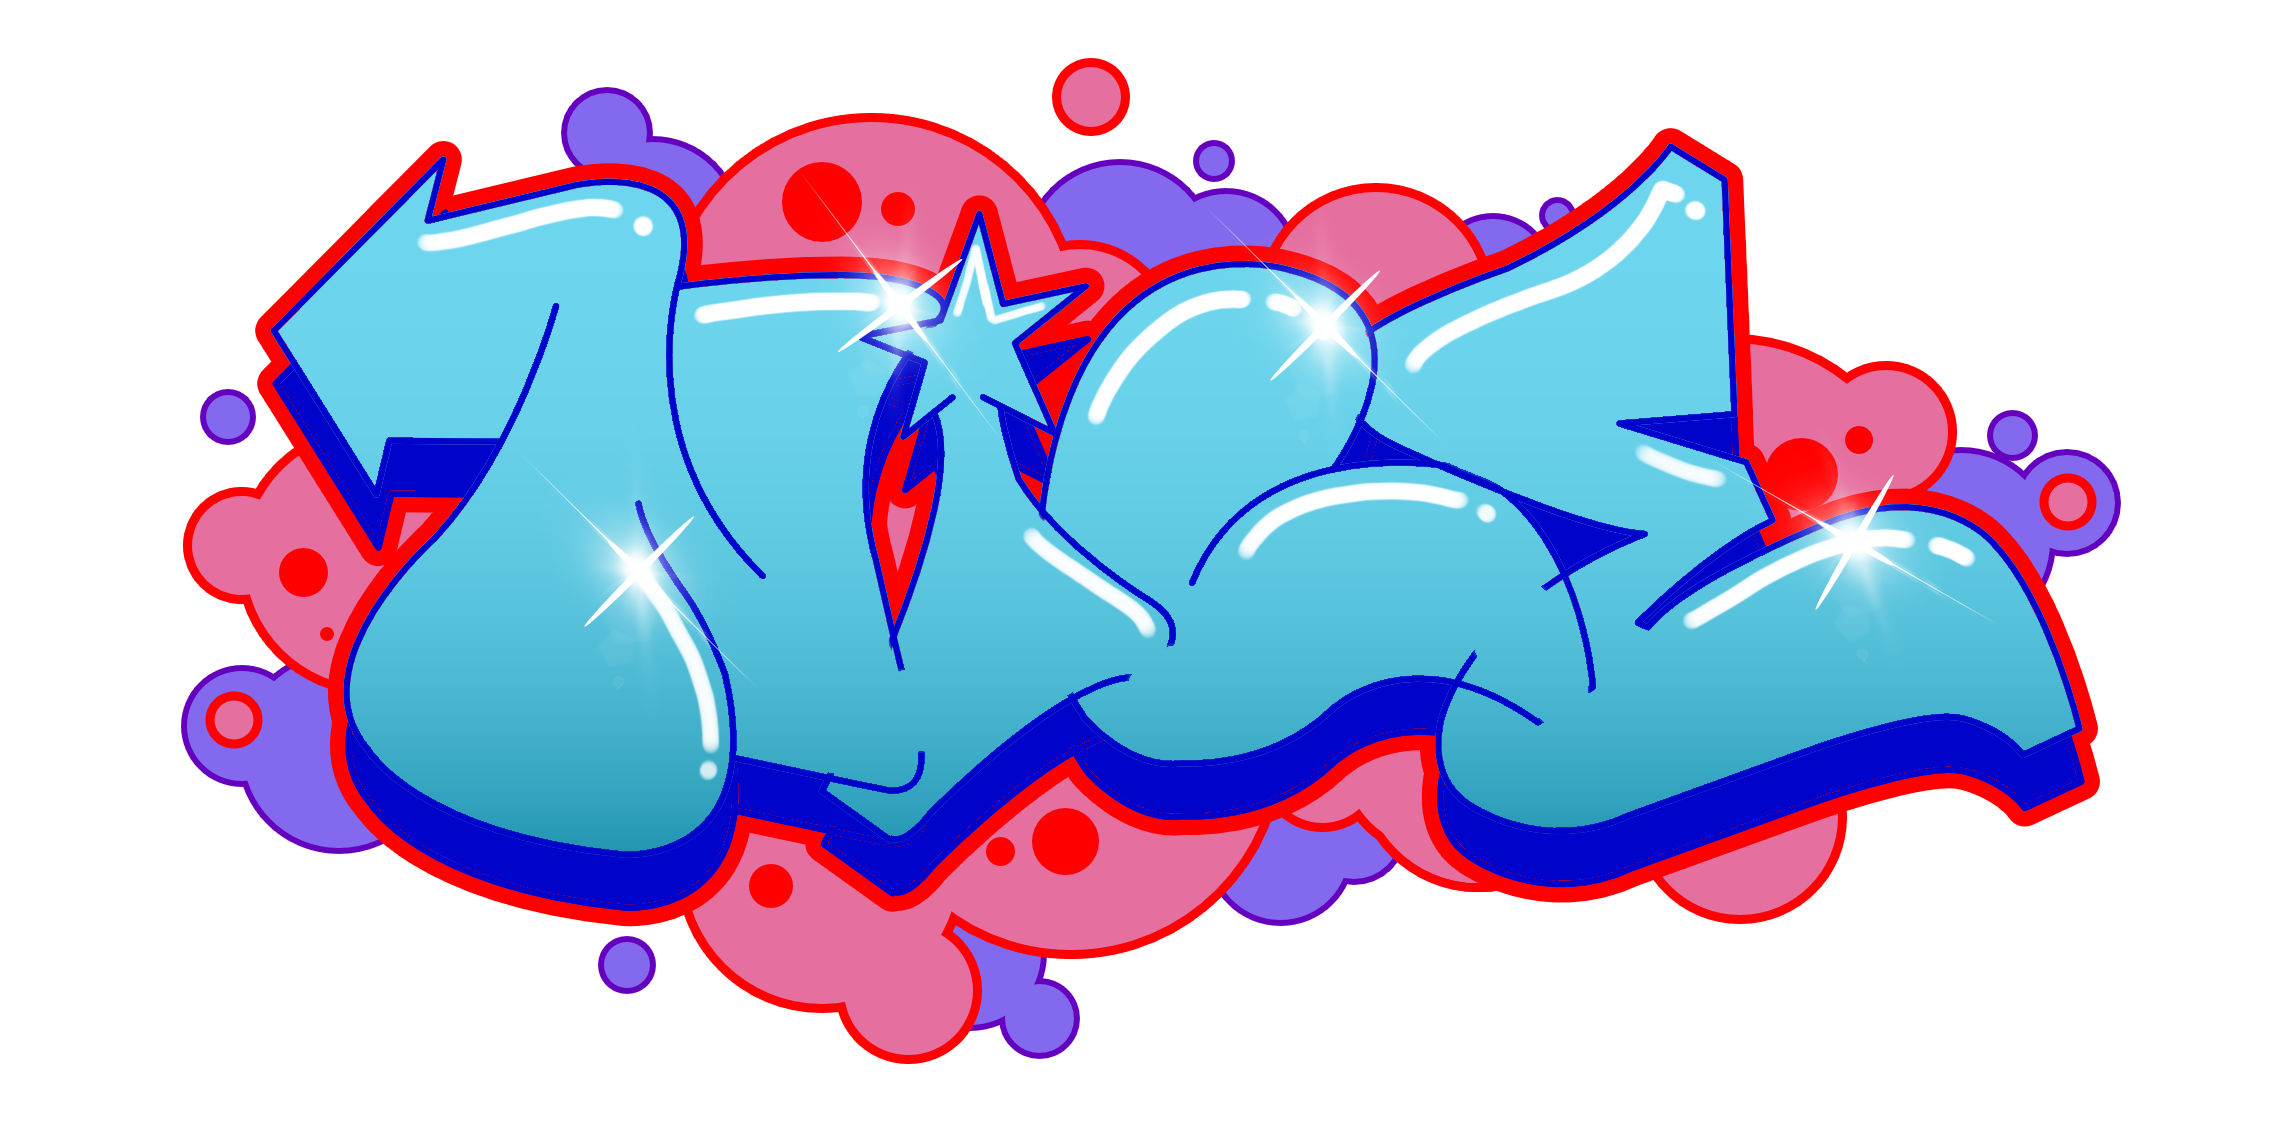 How to Draw “Nice” in Graffiti in 10 Steps